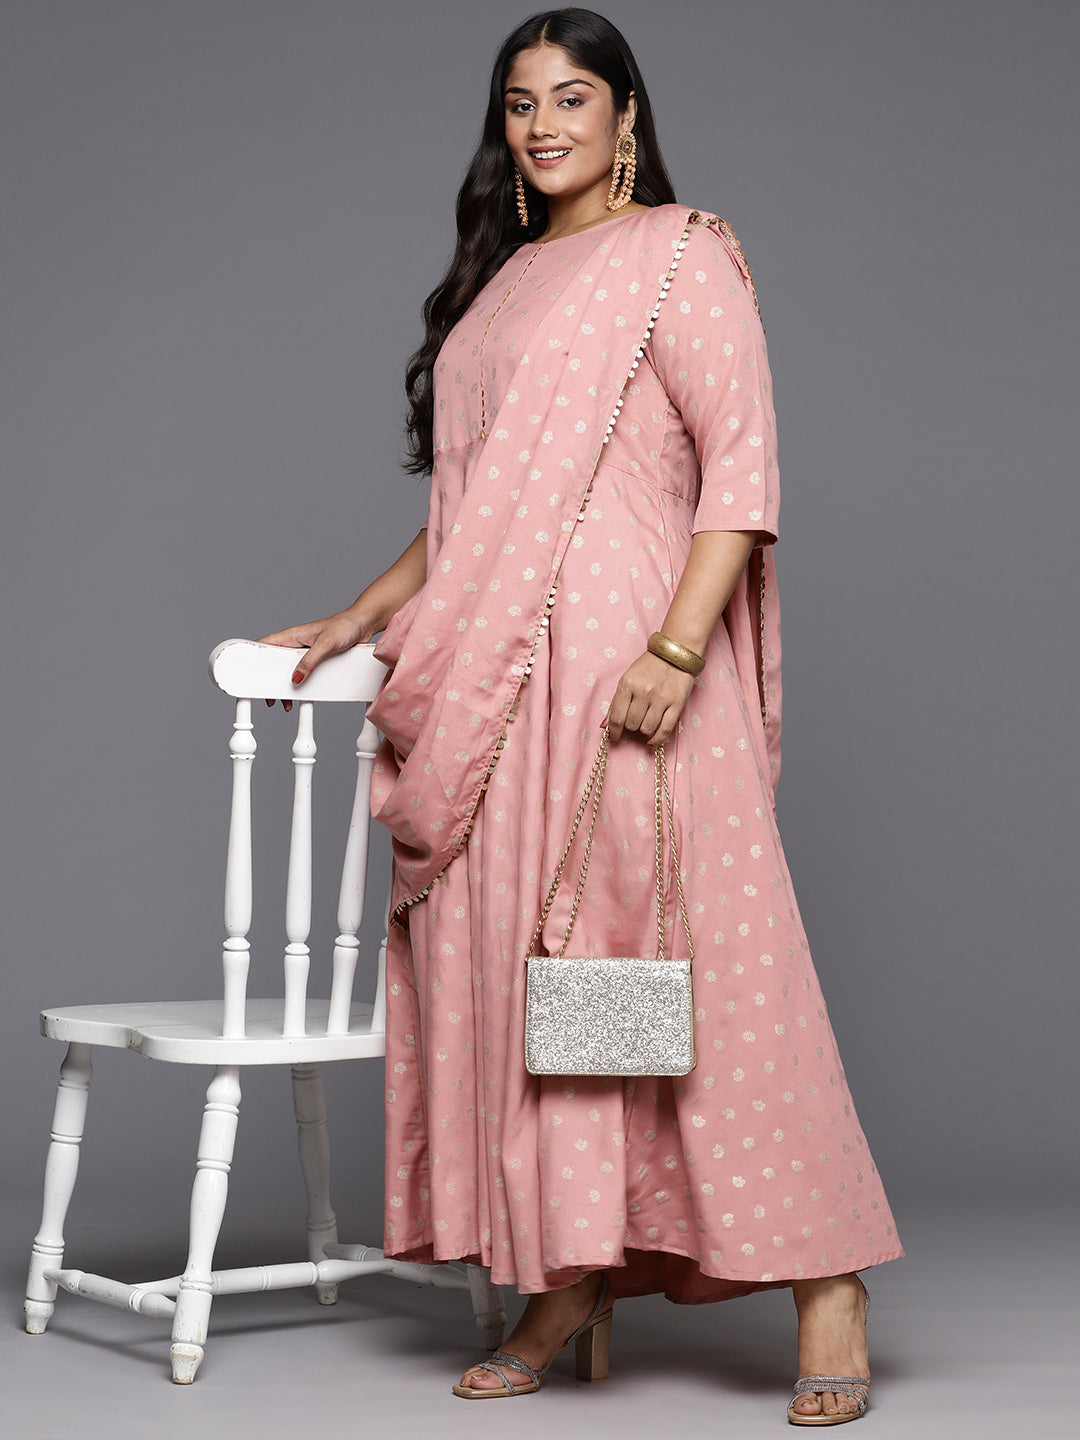 Pink Printed Plus Size A-Line Maxi Dress with Dupatta